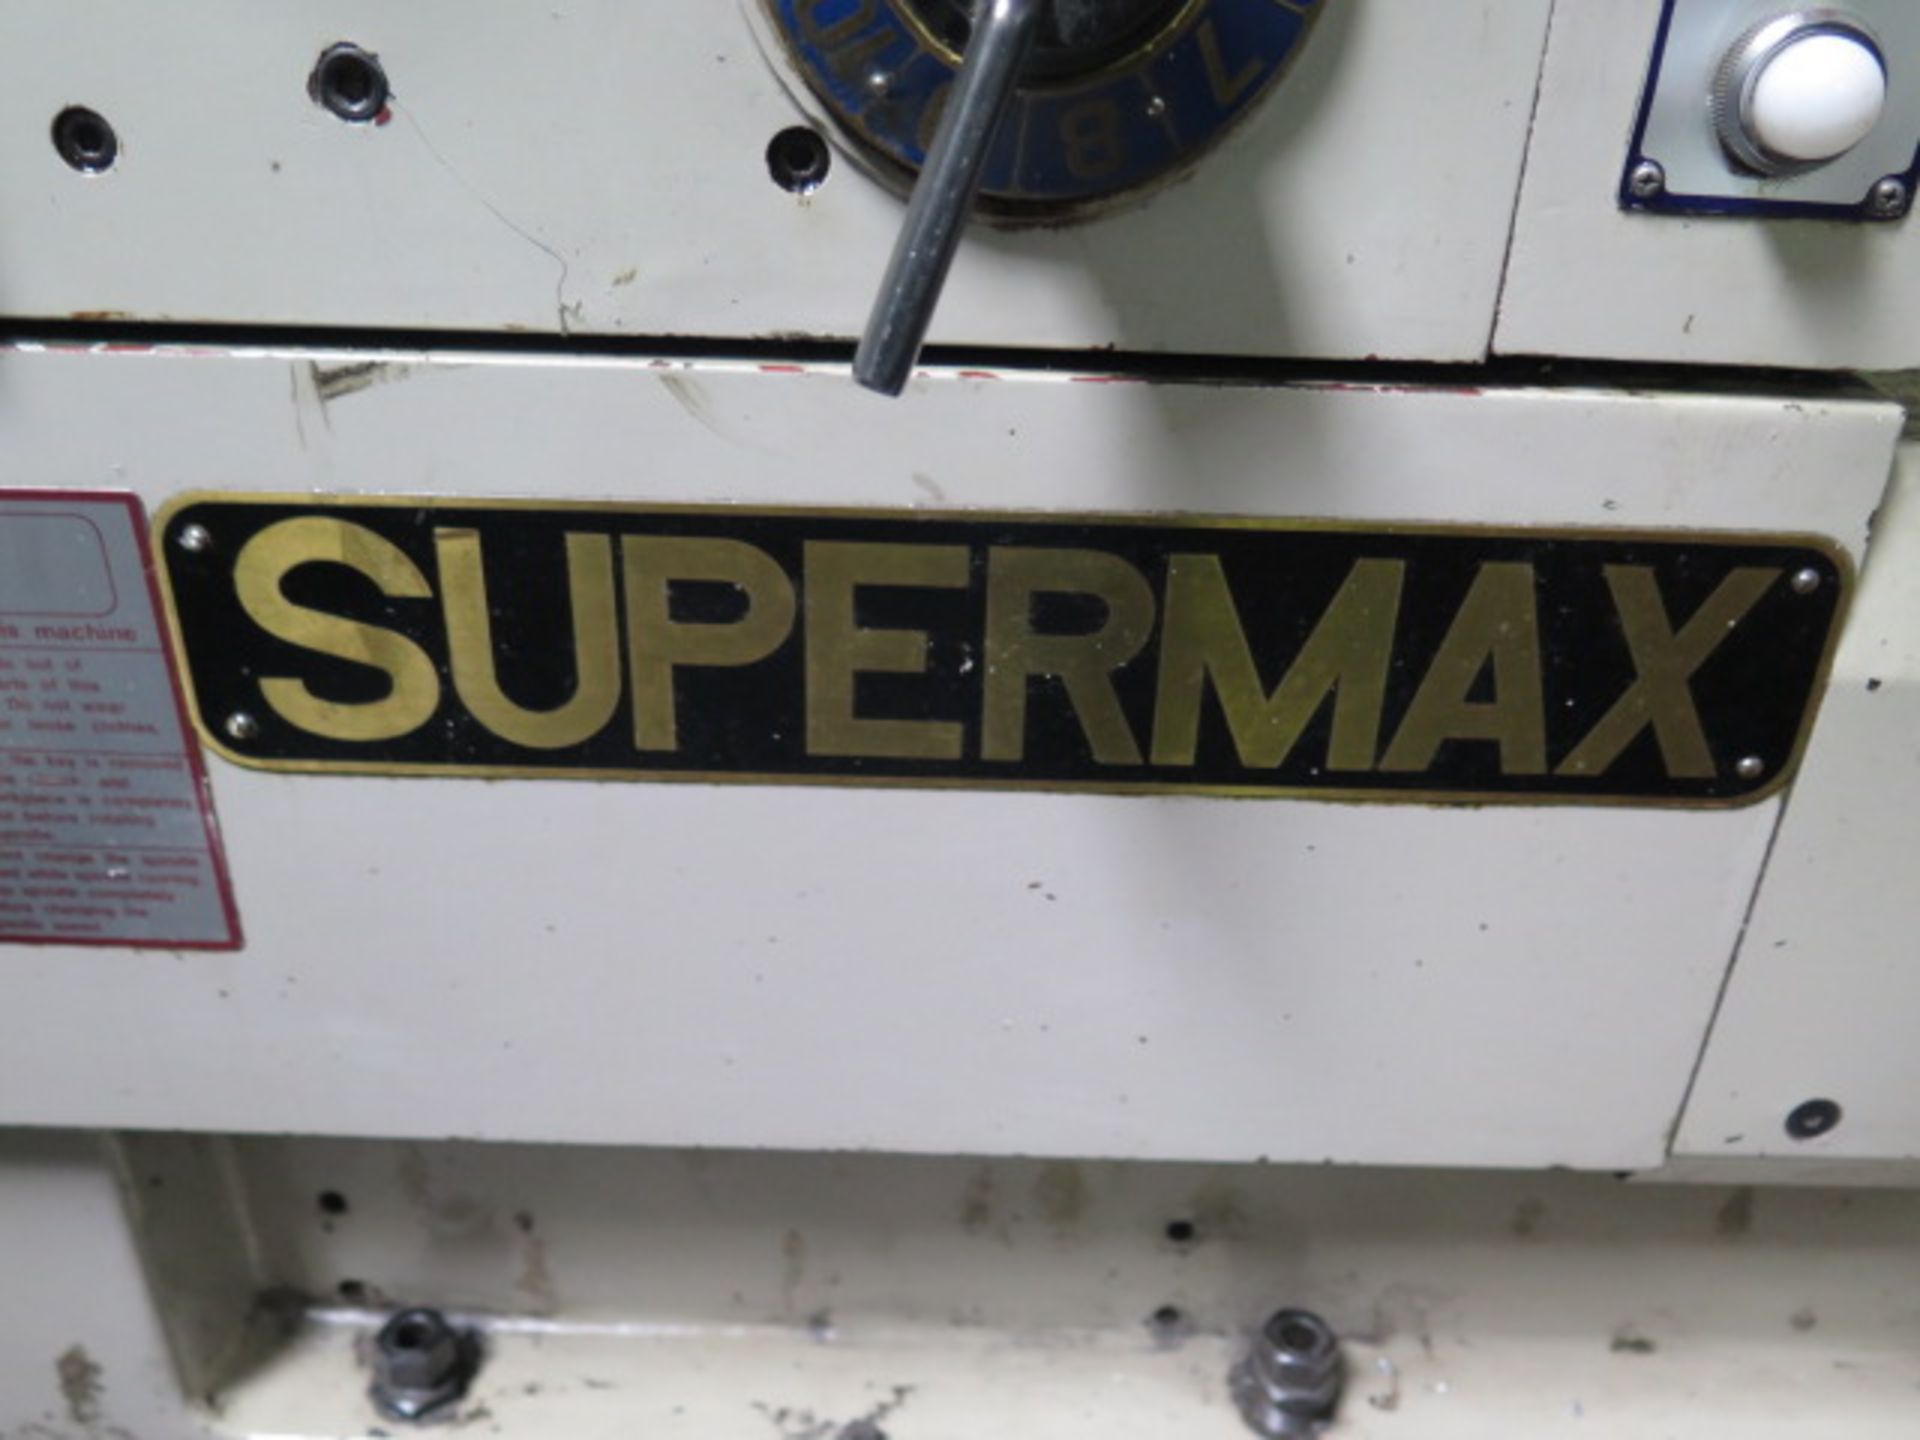 Supermax LG2236G 22" x 36" Geared Head Gap Bed Lathe w/ Sony DRO, 20-1550 RPM, Inch/mm, SOLD AS IS - Image 14 of 18